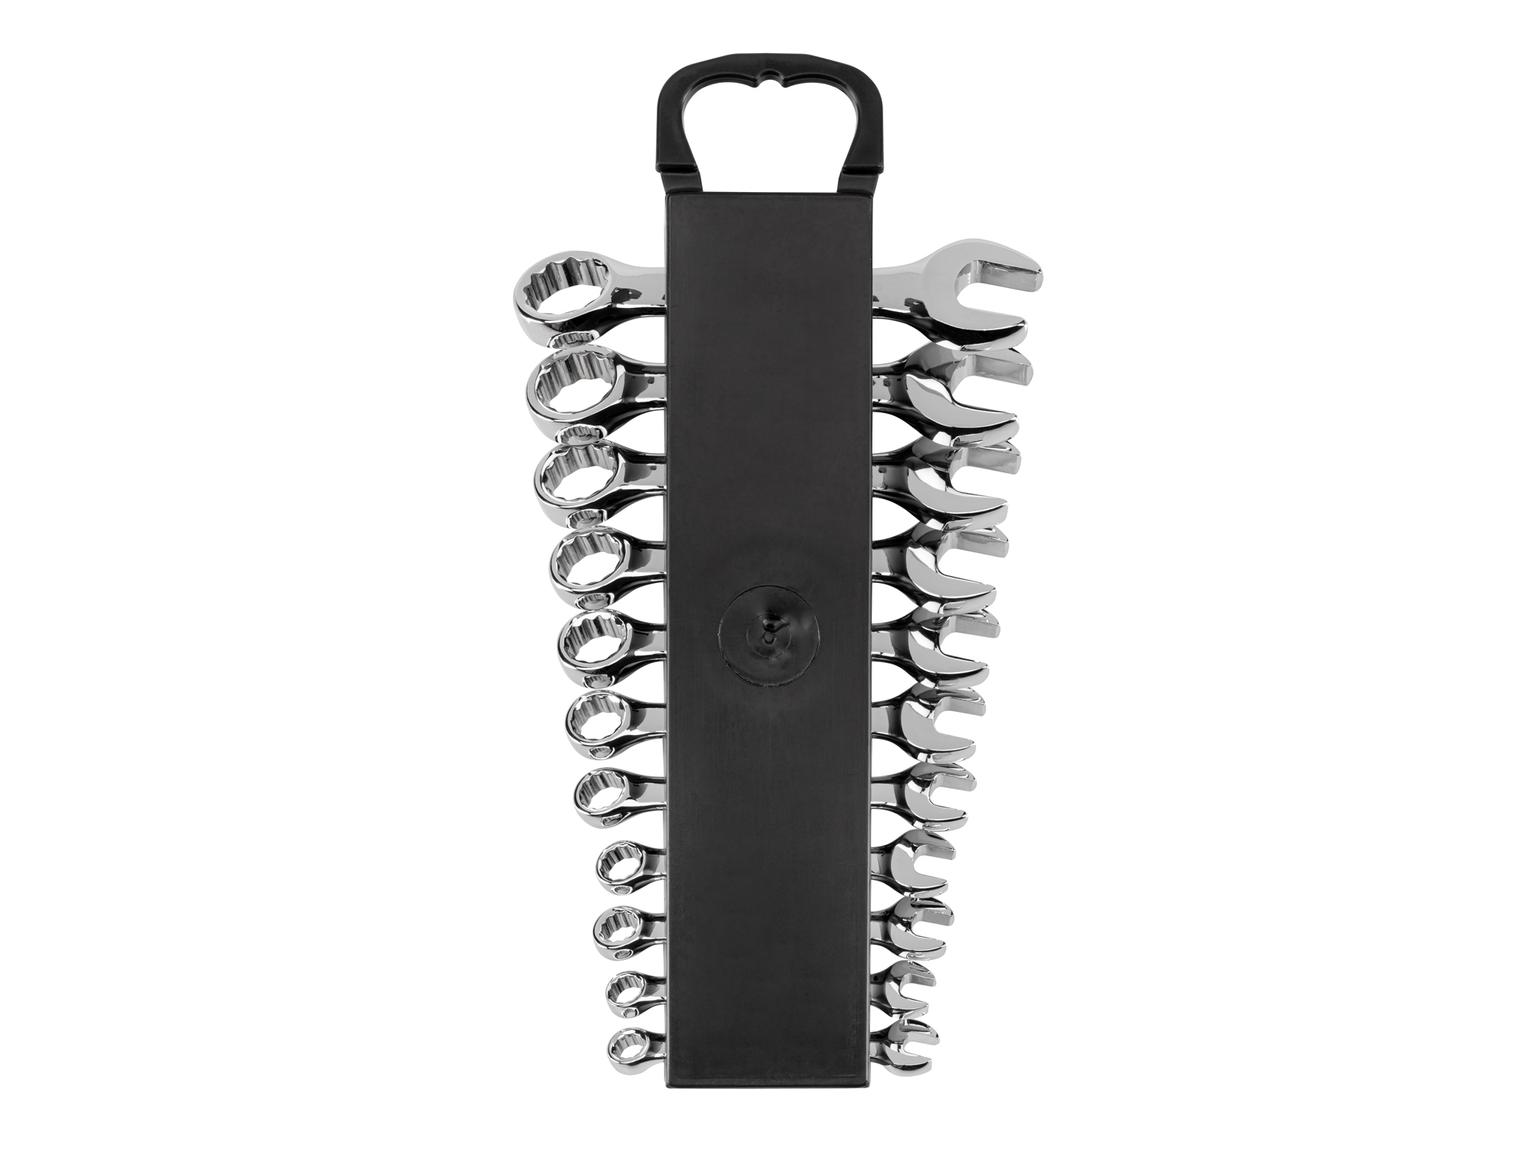 TEKTON WCB92401-T Stubby Combination Wrench Set with Holder, 11-Piece (1/4 - 3/4 in.)